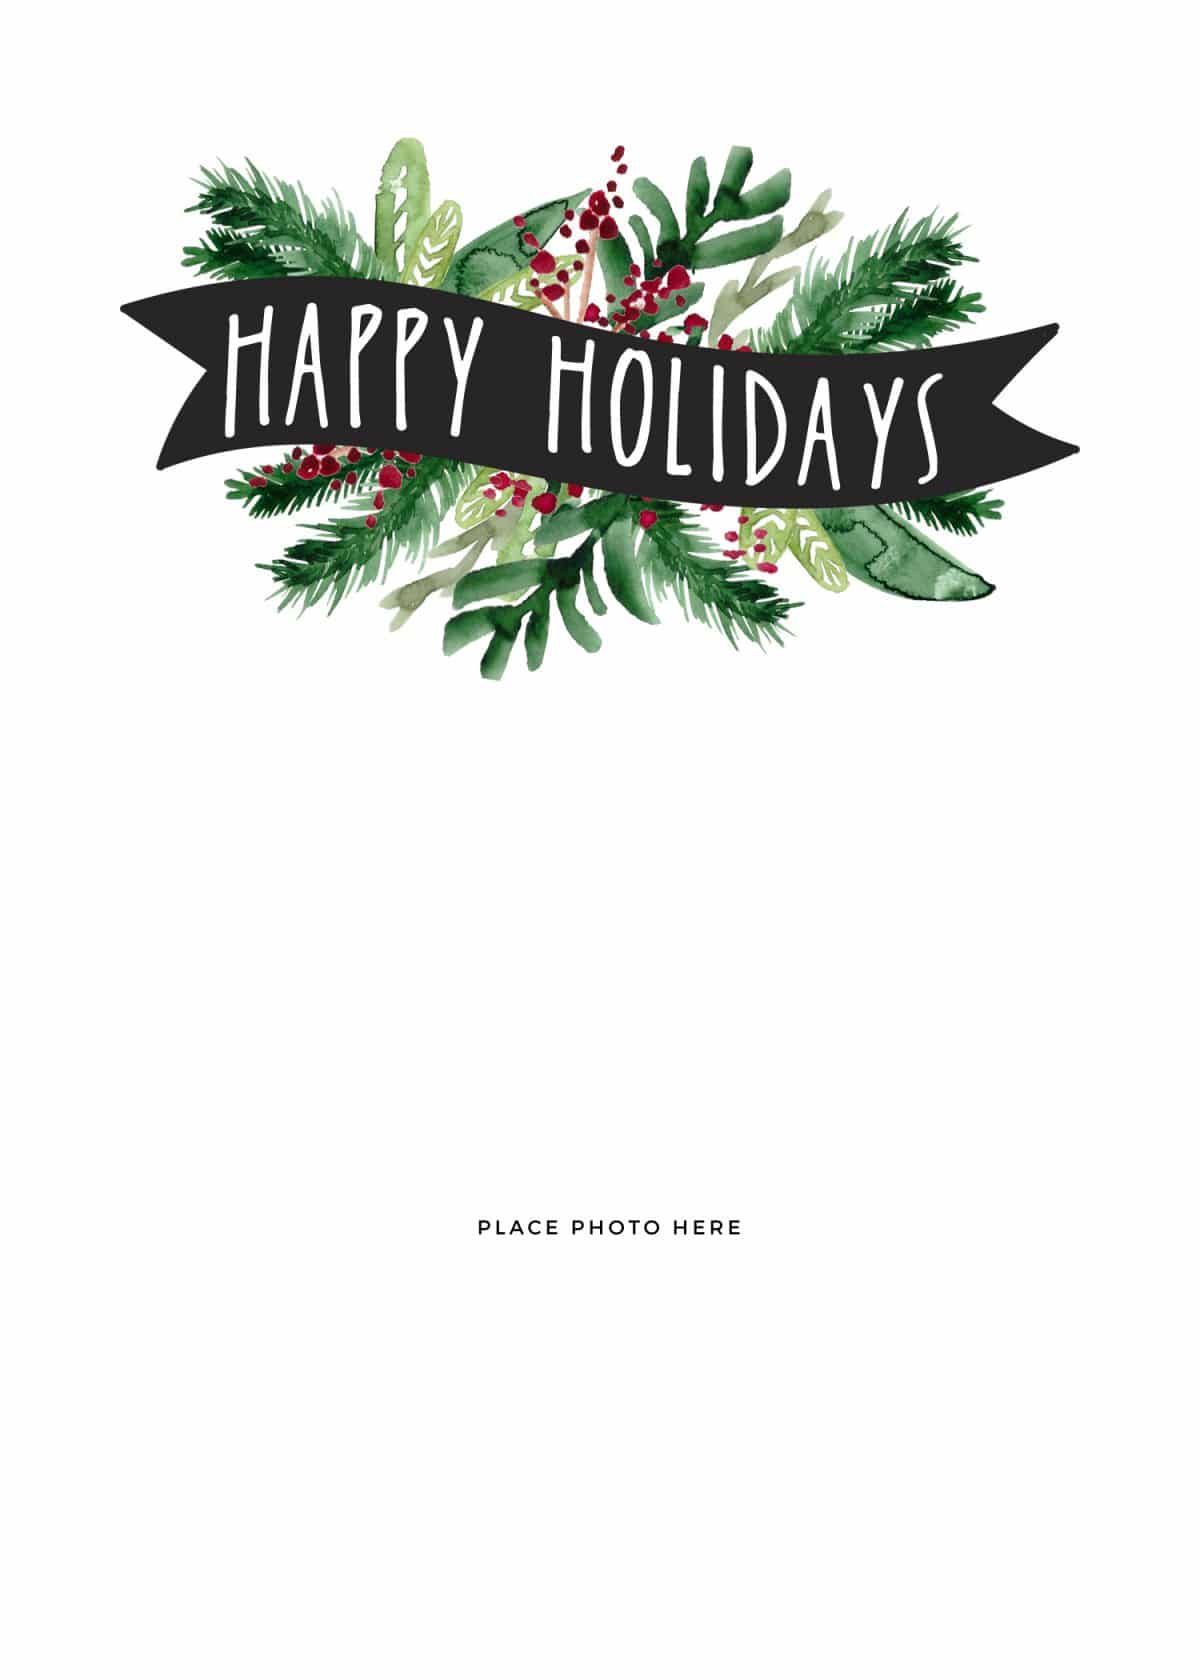 79 Adding Christmas Card Templates Images in Word with Christmas Card Templates Images